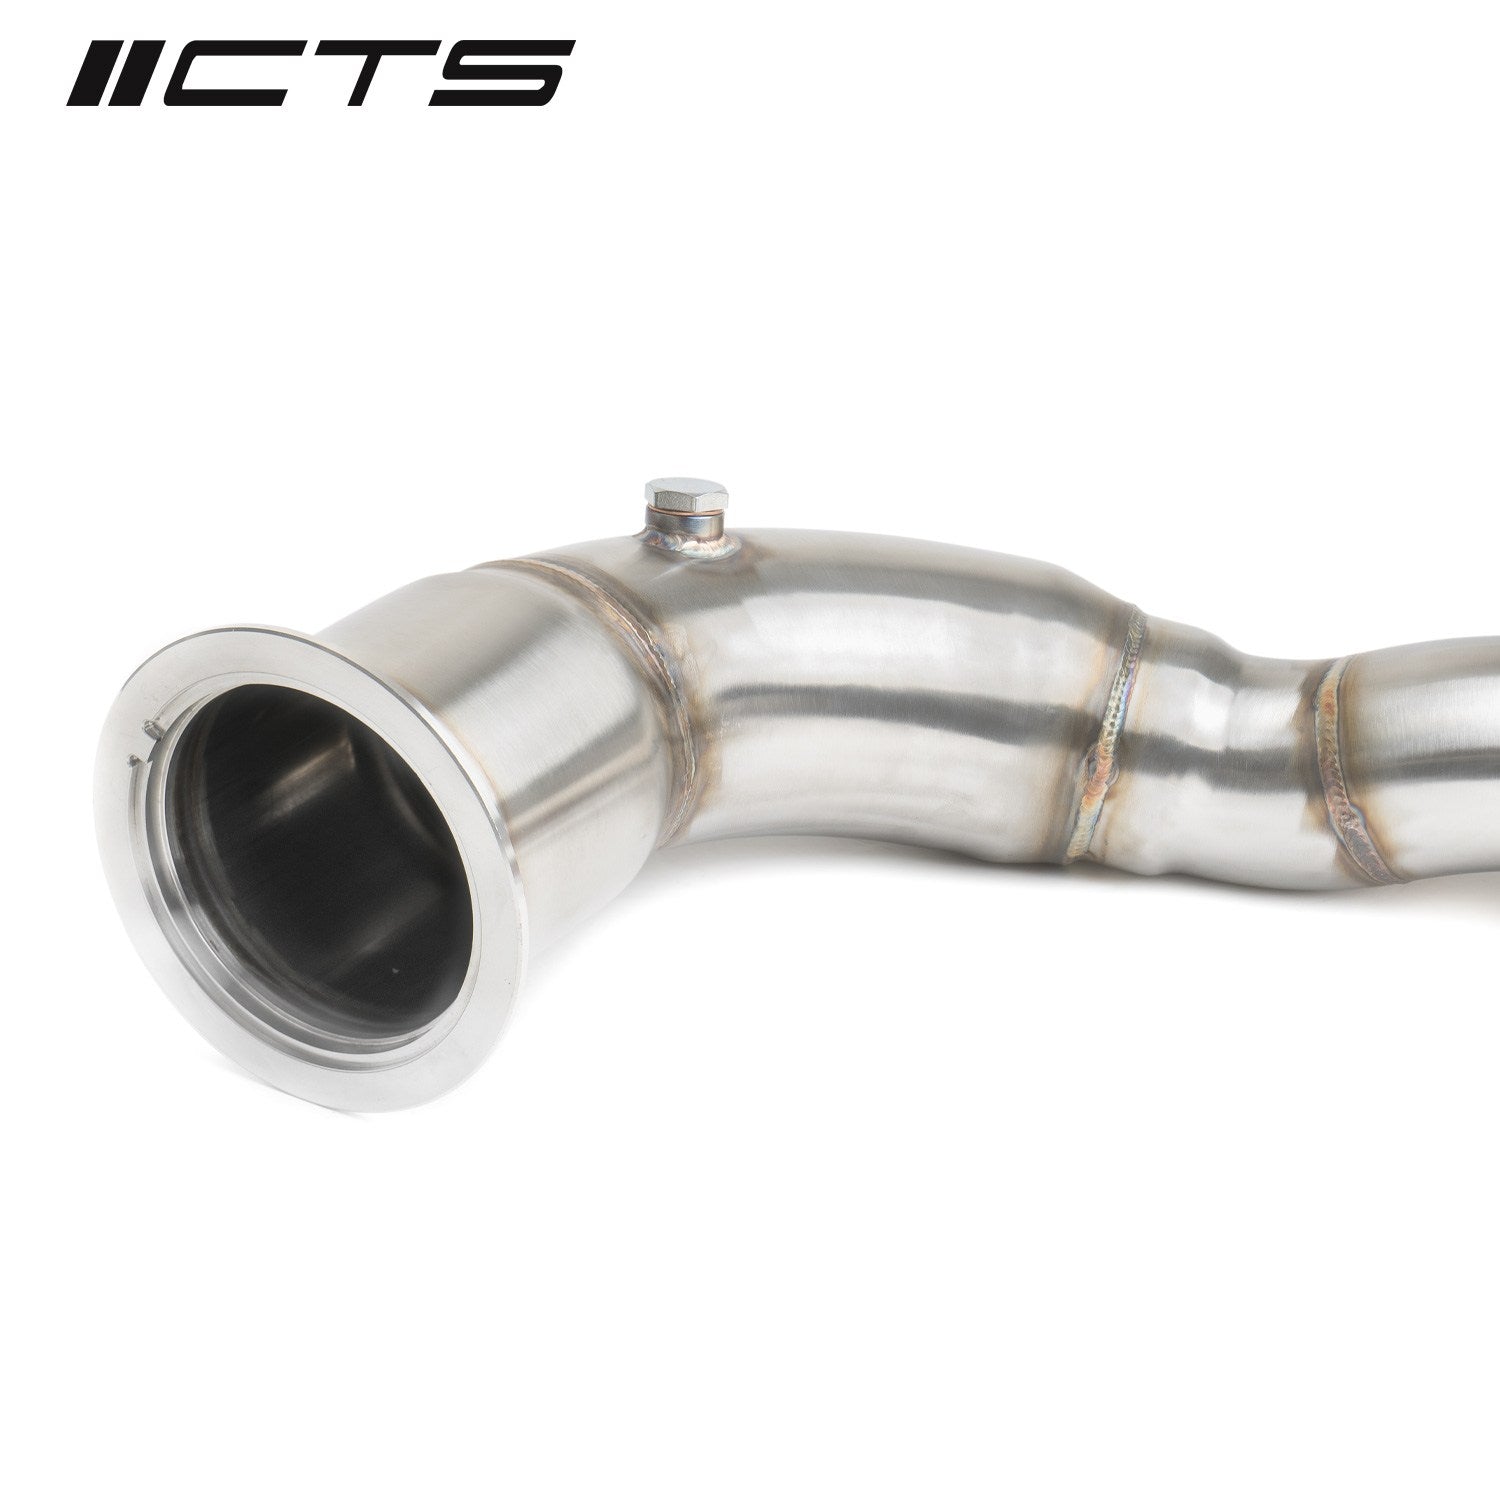 CTS TURBO B9 AUDI RS5 TEST PIPES - 0